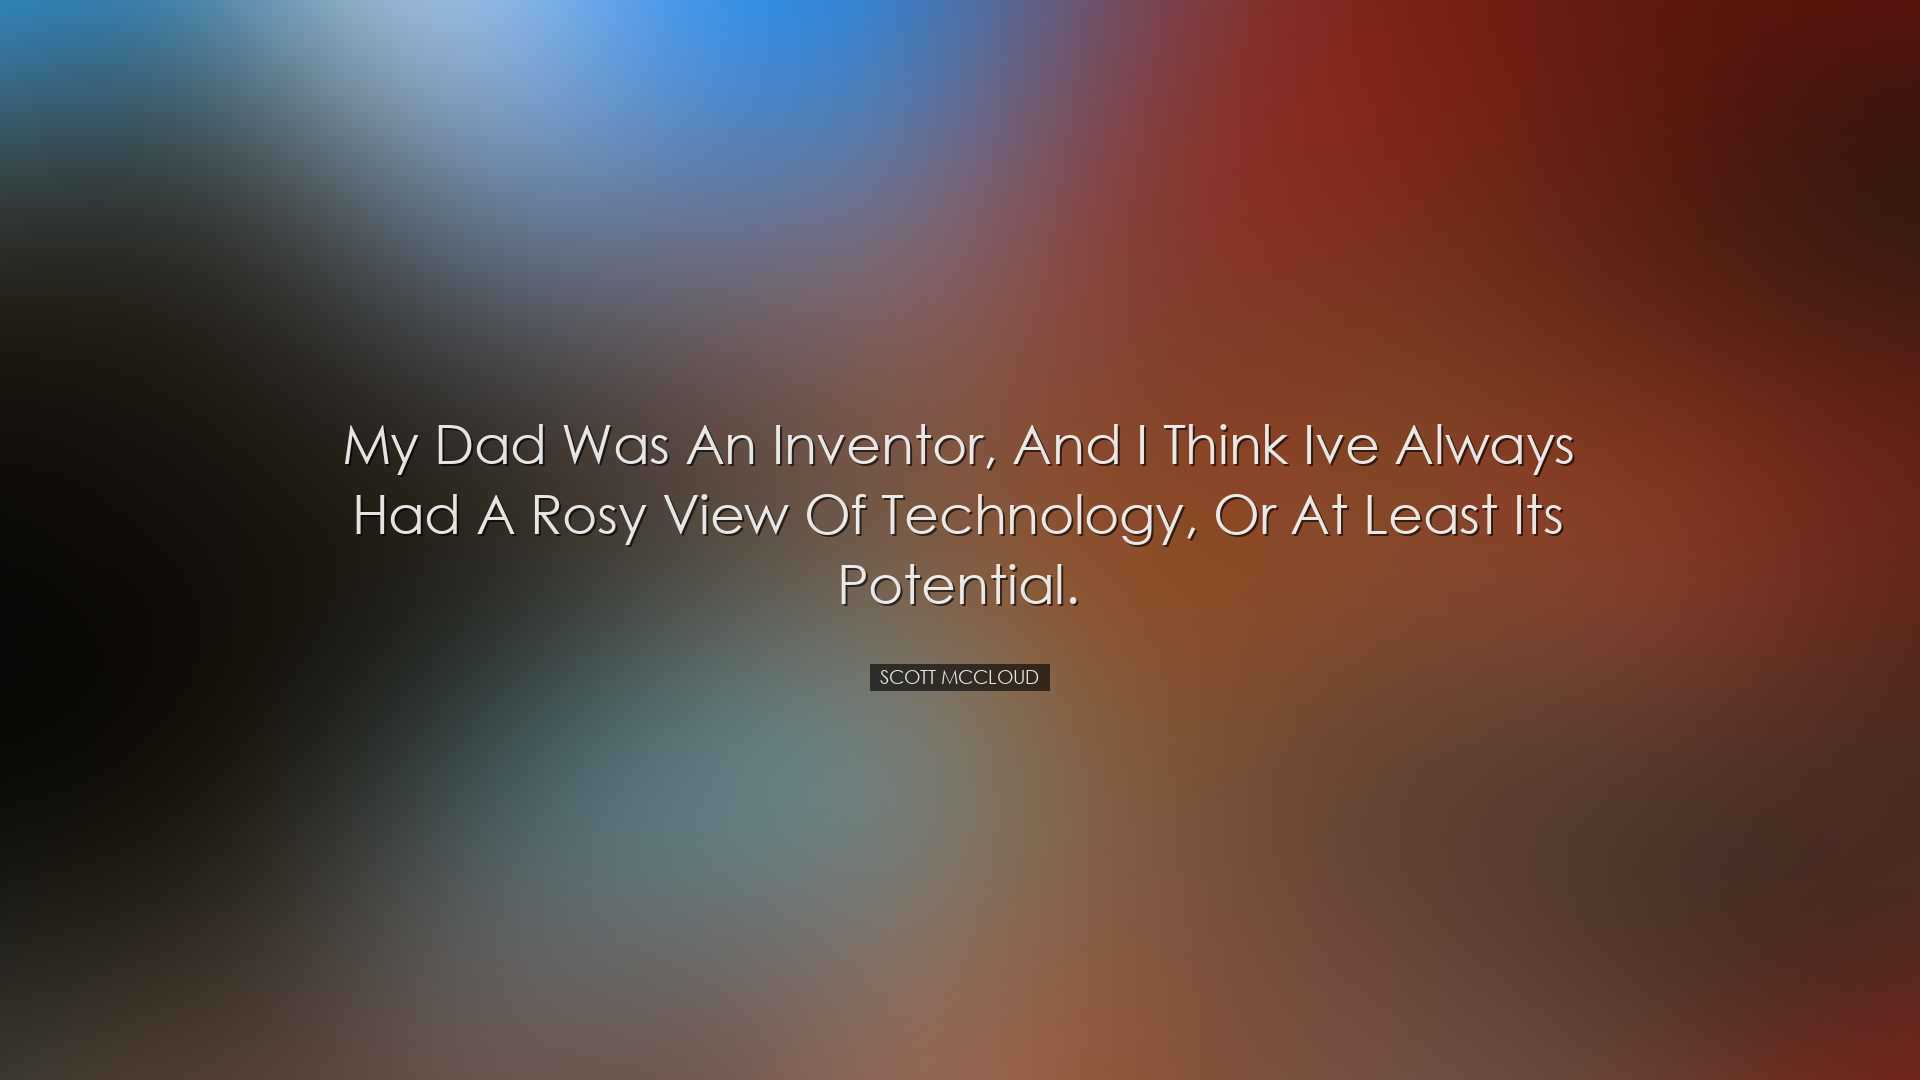 My dad was an inventor, and I think Ive always had a rosy view of